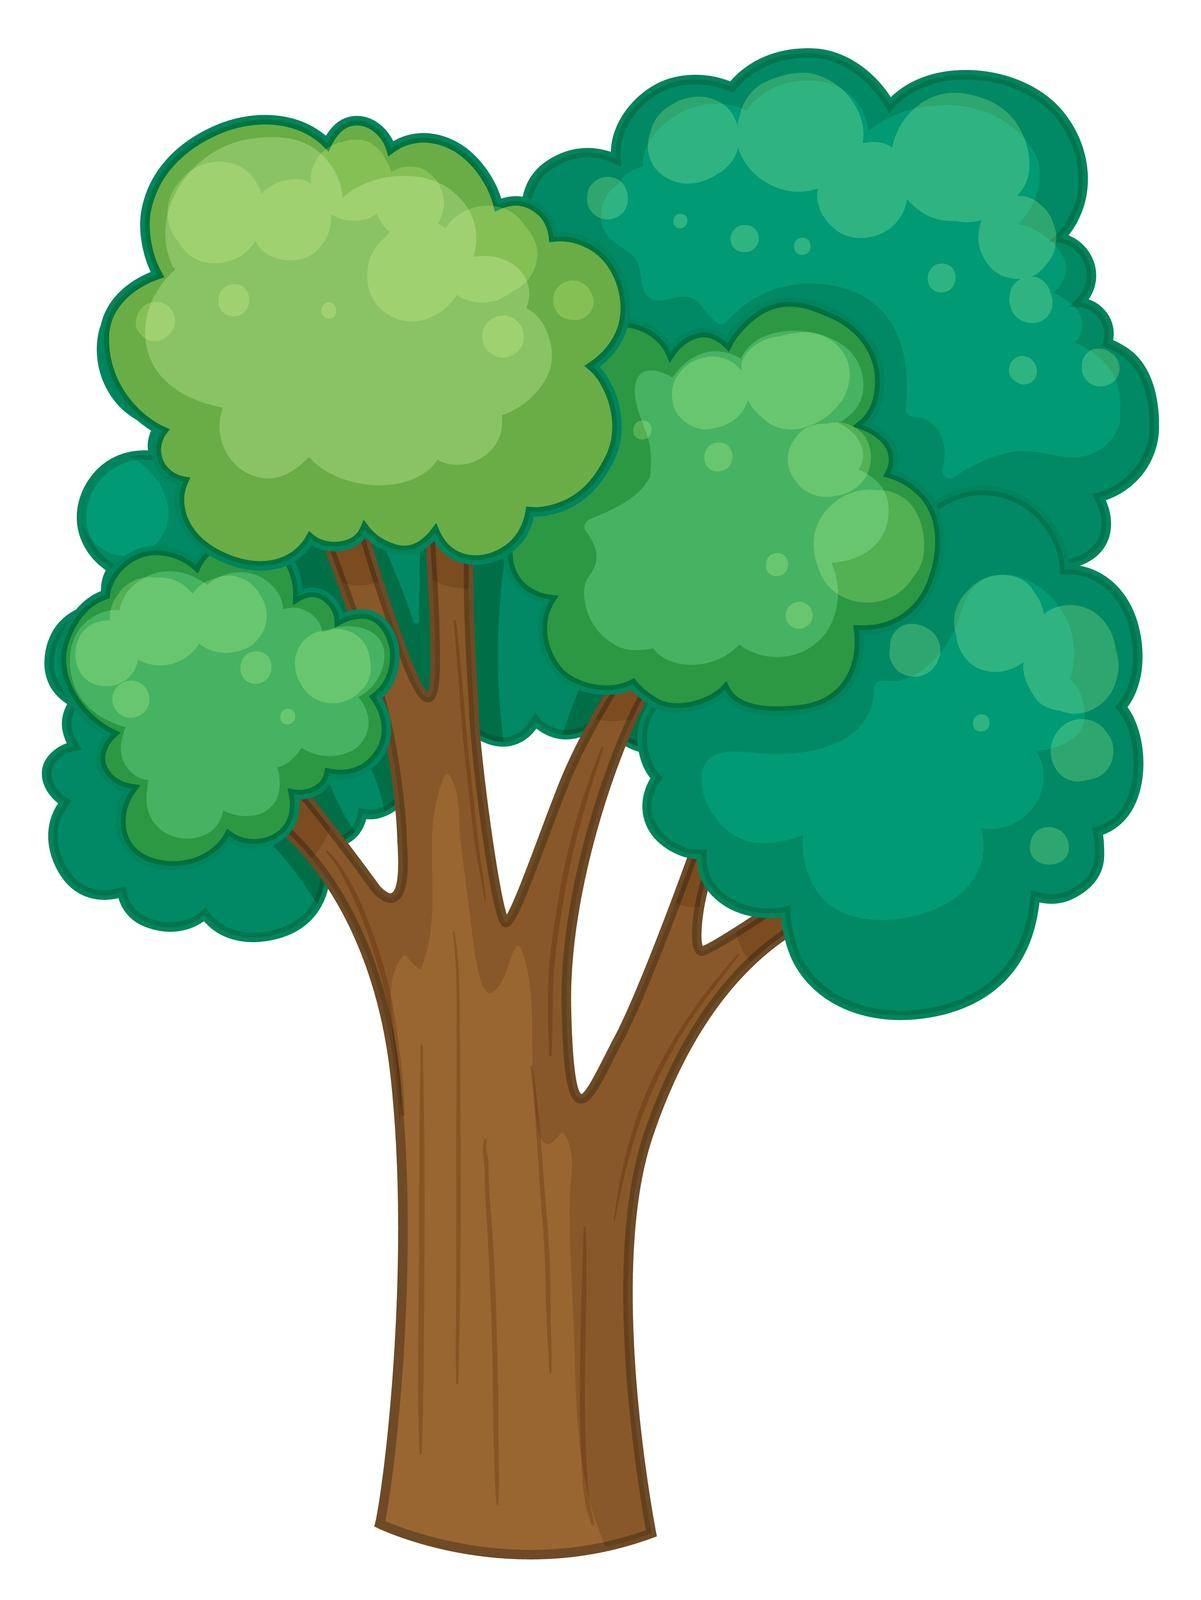 Tree with many branches illustration